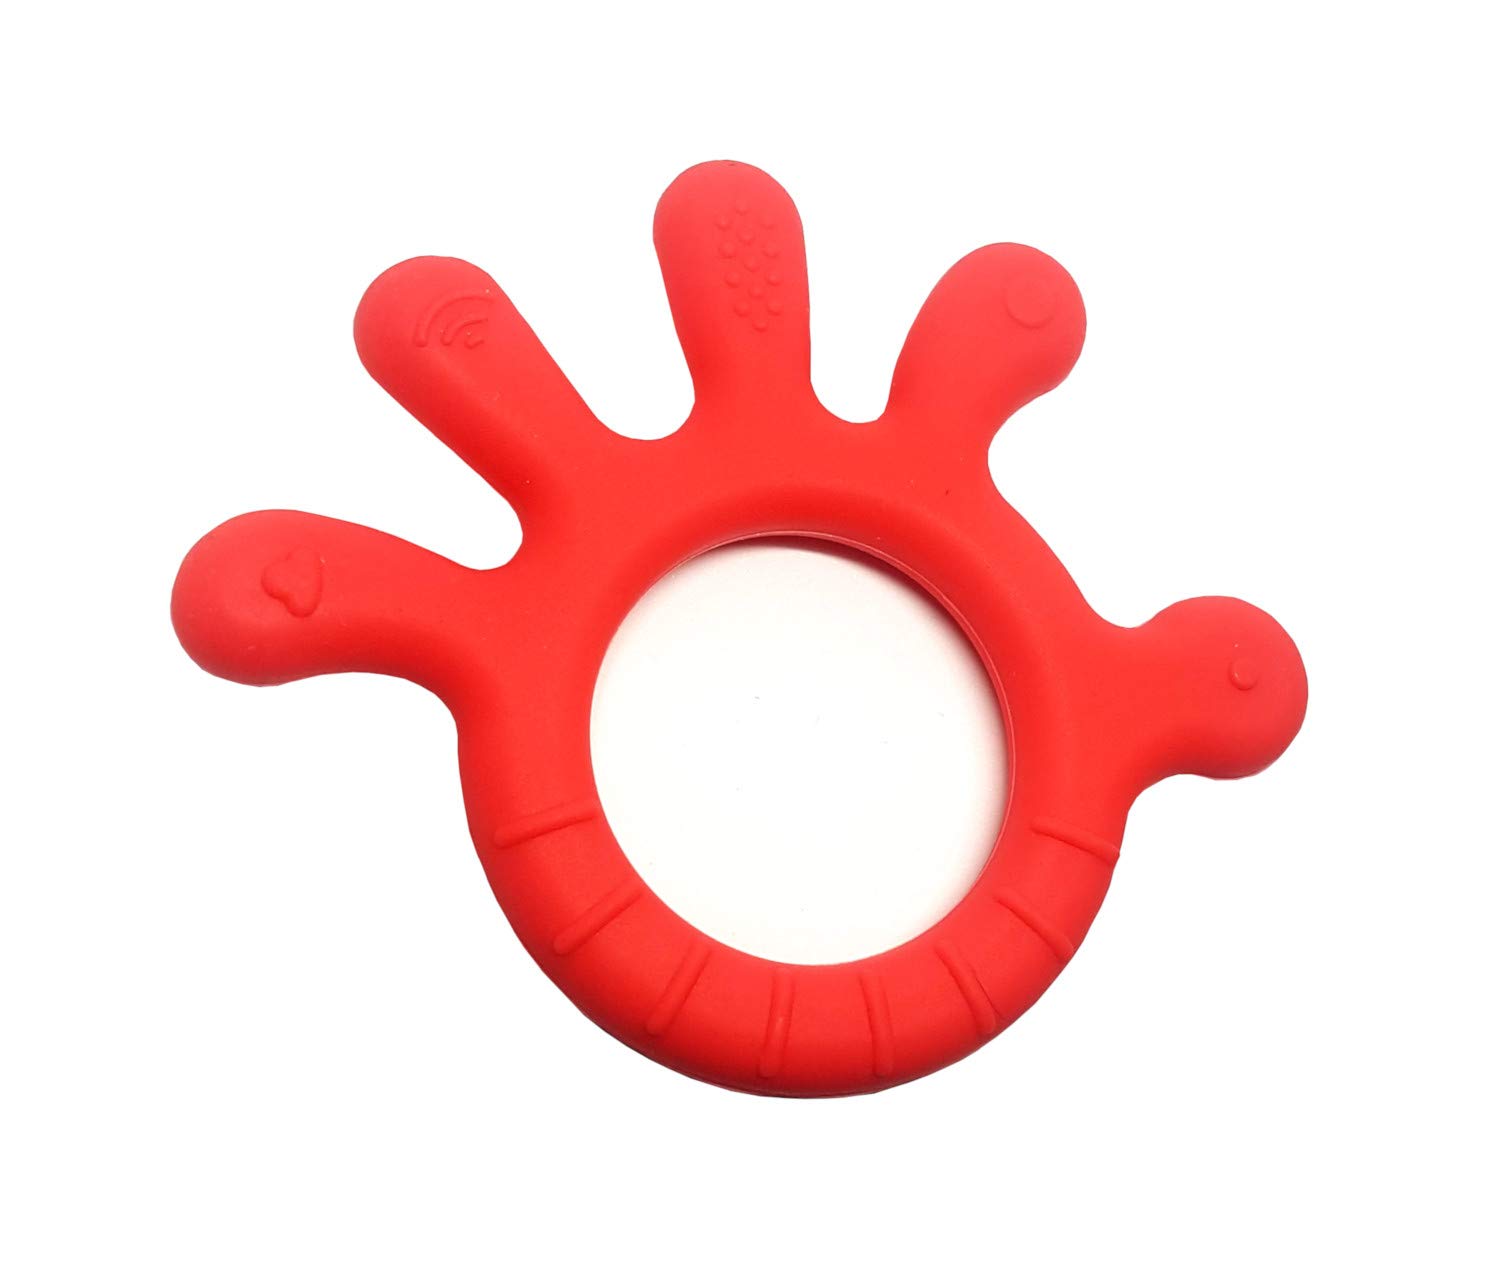 Chic Buddy BPA-Free Silicone Finger Shape teether